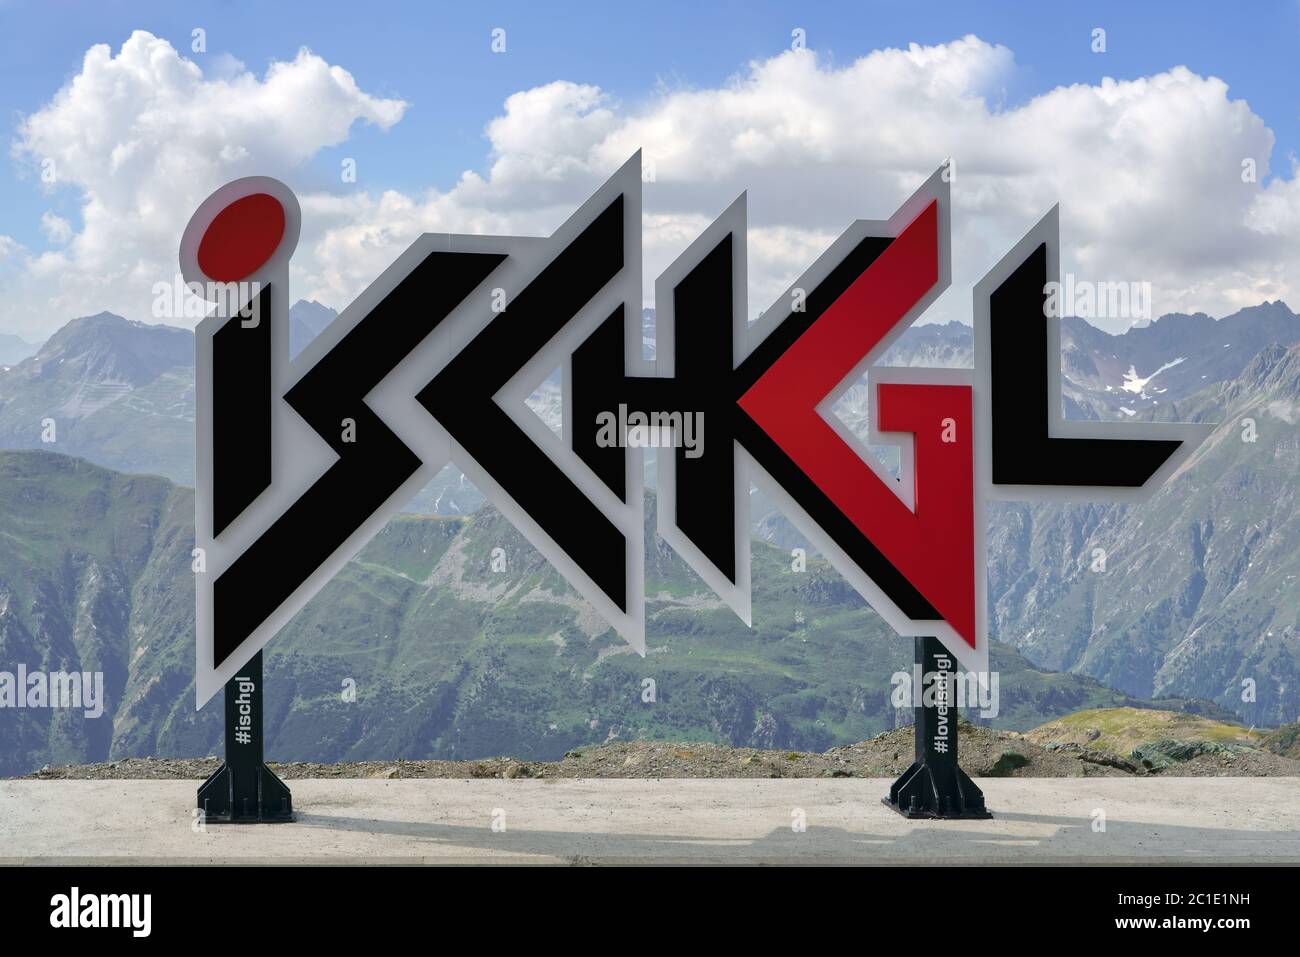 ISCHGL, TYROL, AUSTRIA - AUGUST 30, 2019:  Logo of the Tyrolean town of Ischgl on top of the mountain. Stock Photo